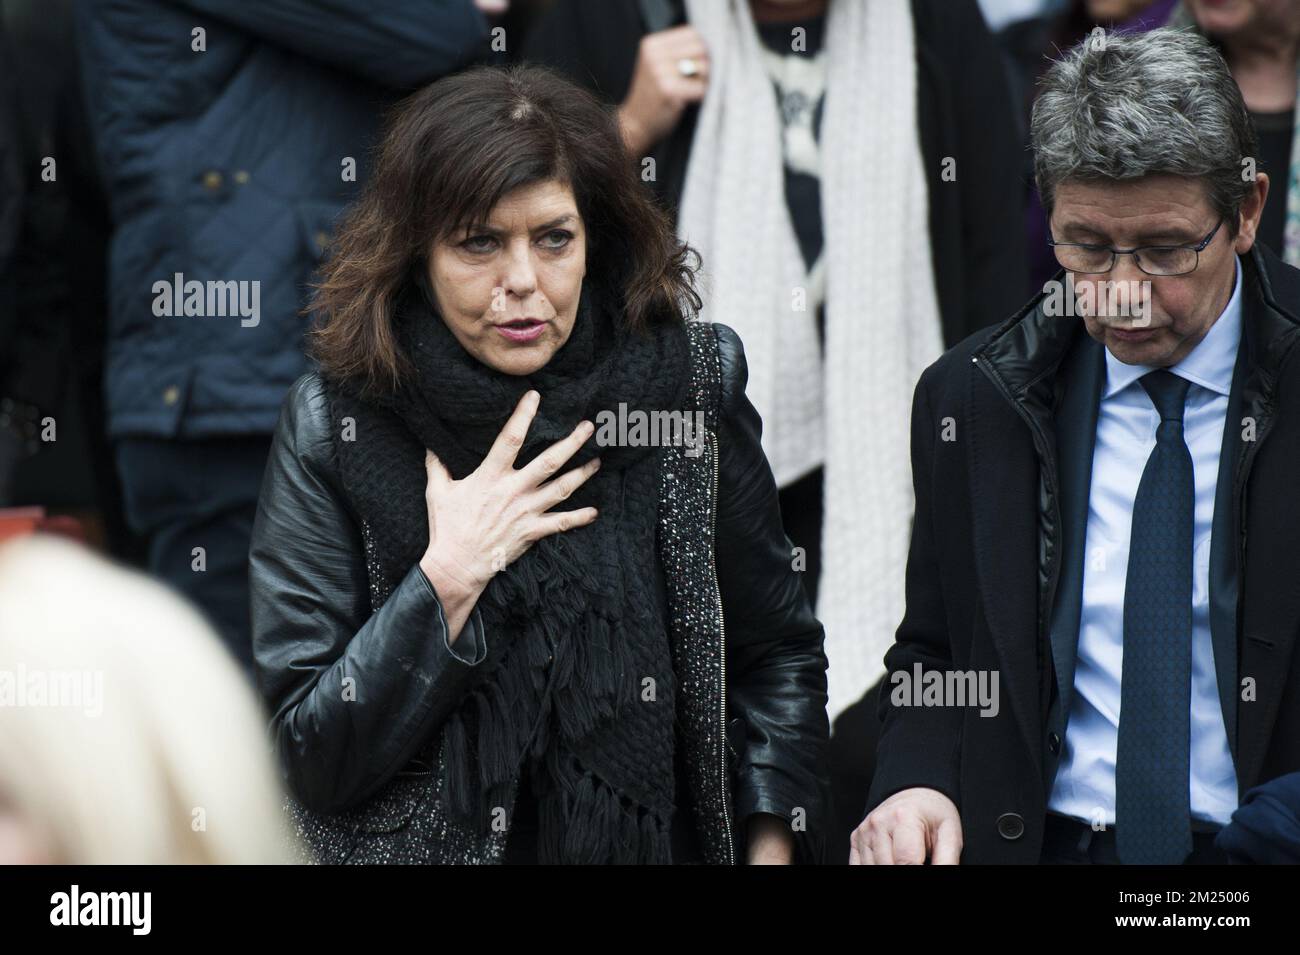 cdH's Joelle Milquet pictured during the farewell ceremony for former mayor of Seraing and PS politician Gaston Onkelinx who died at the age of 84, on Friday 03 February 2017, in Ougree. BELGA PHOTO NICOLAS LAMBERT Stock Photo